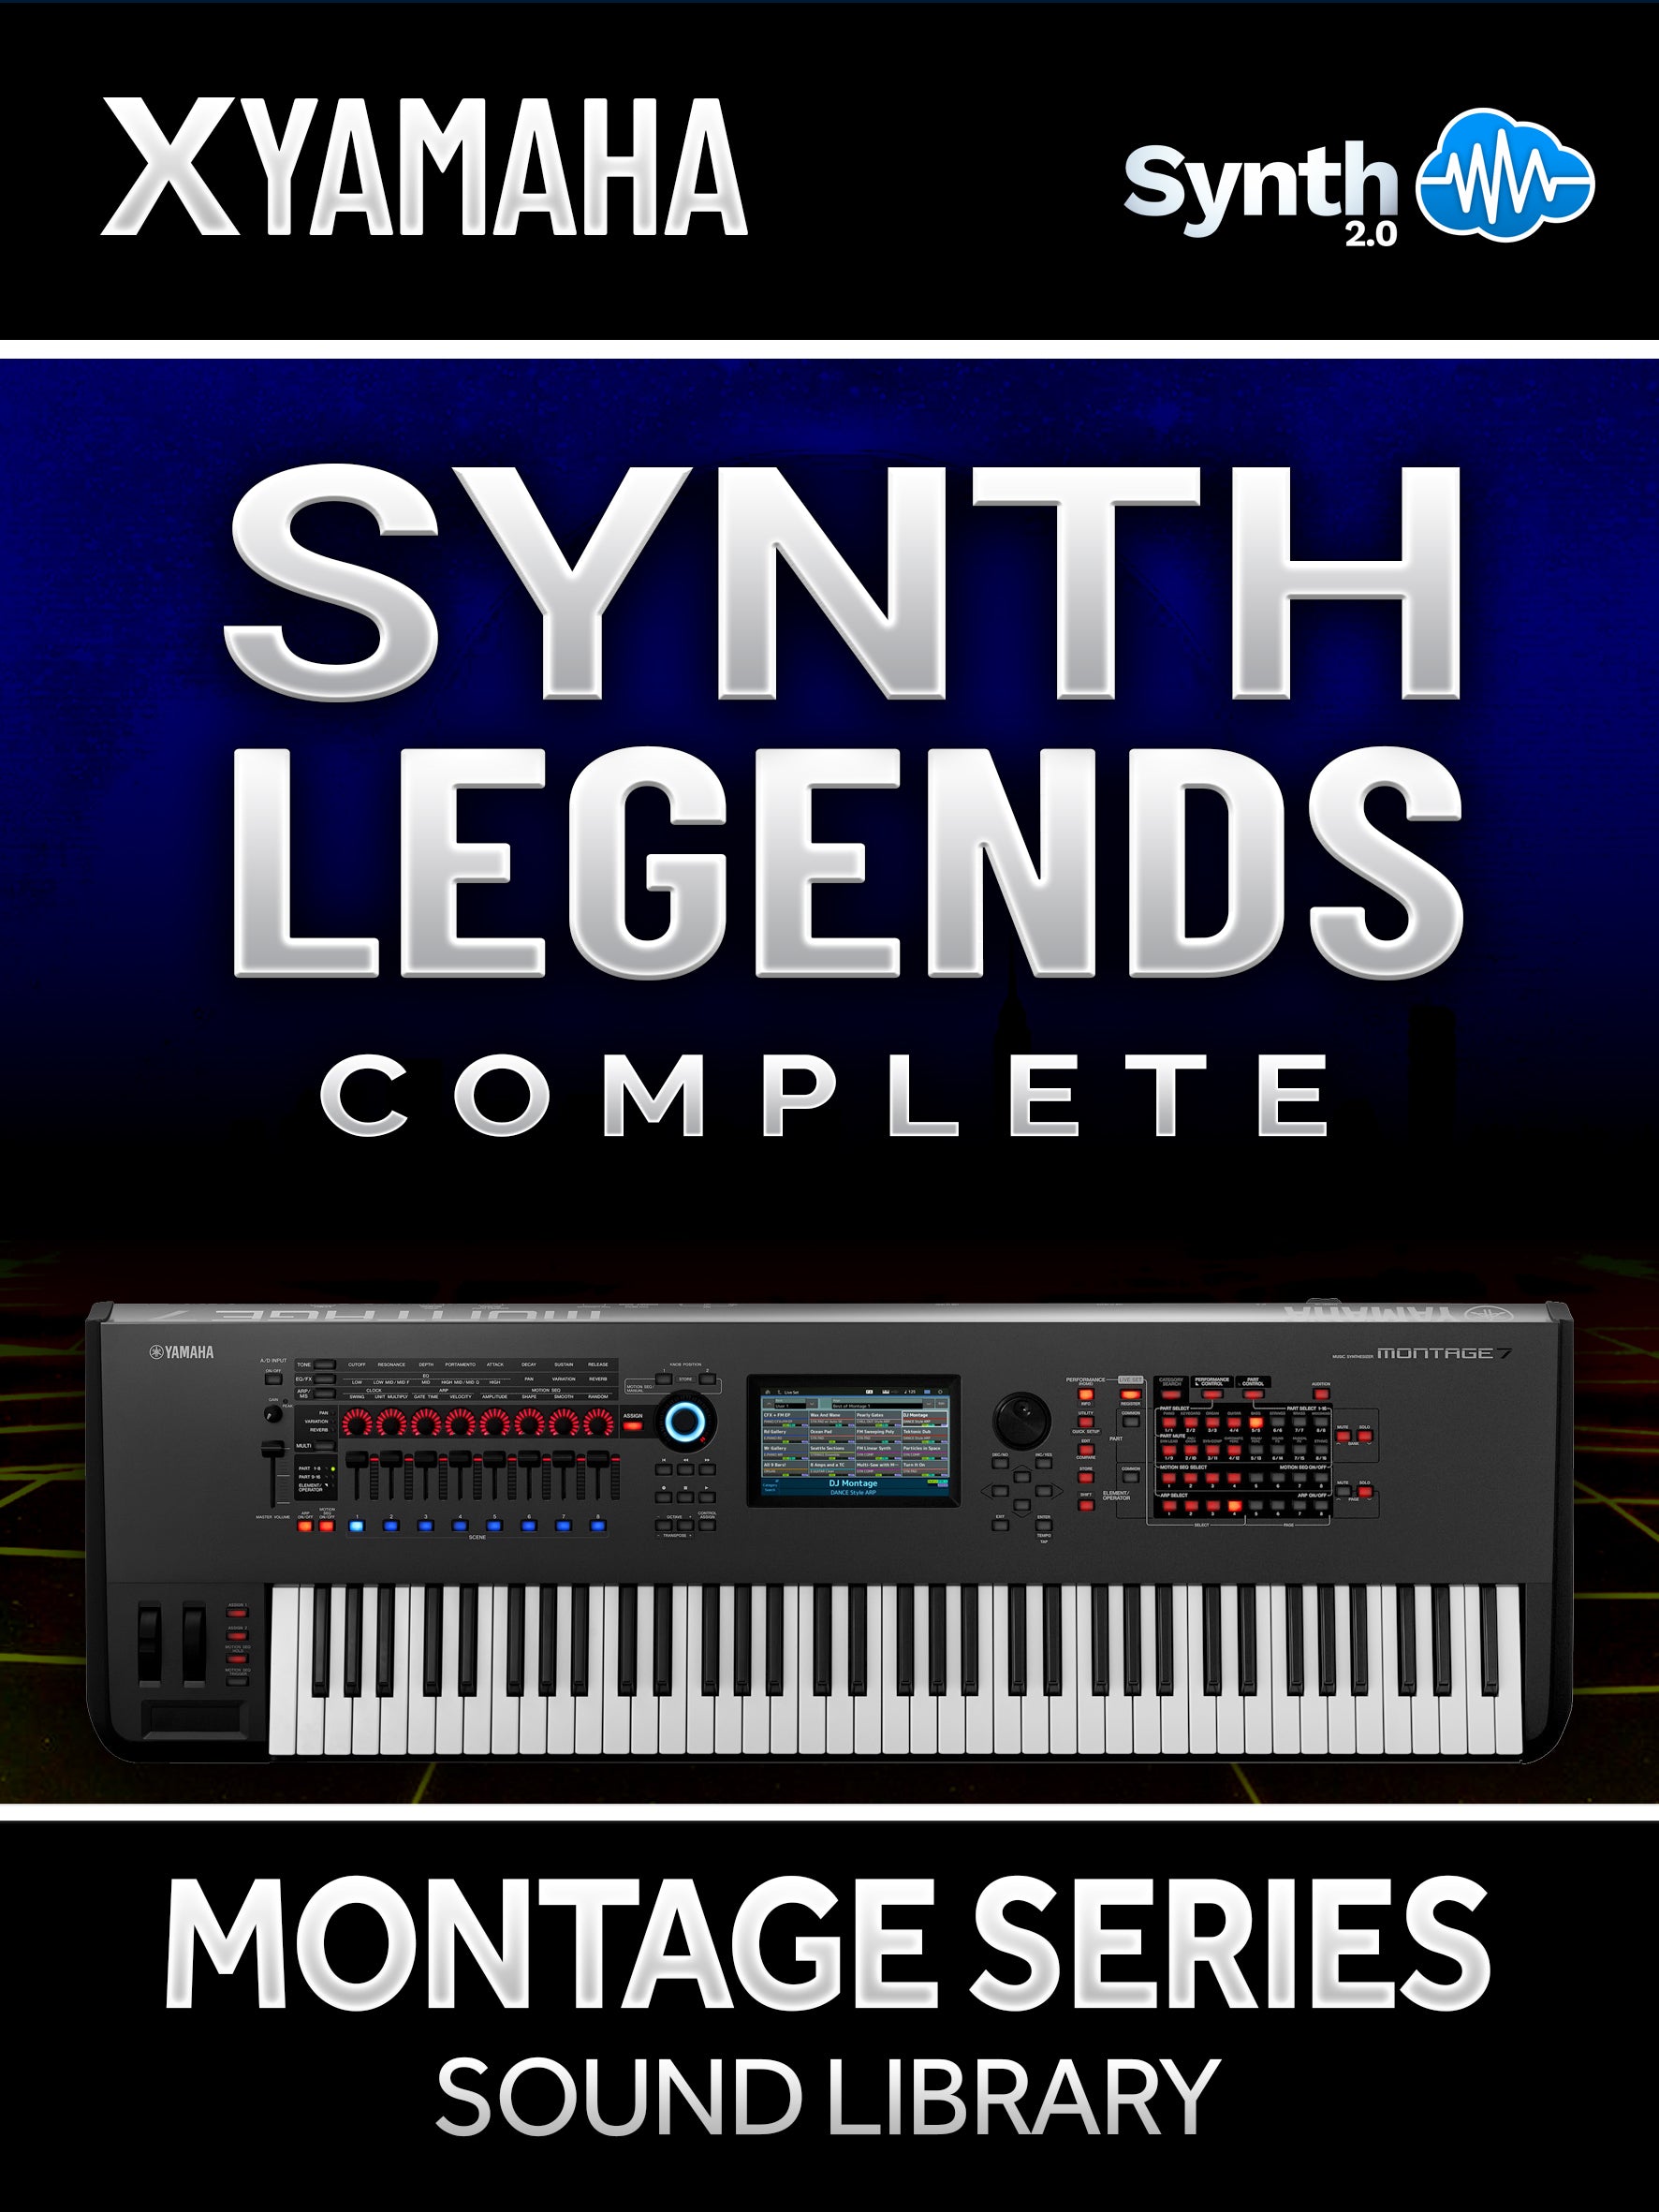 SLG007 - Complete Synth Legends - Yamaha MONTAGE / M ( over 90 presets )